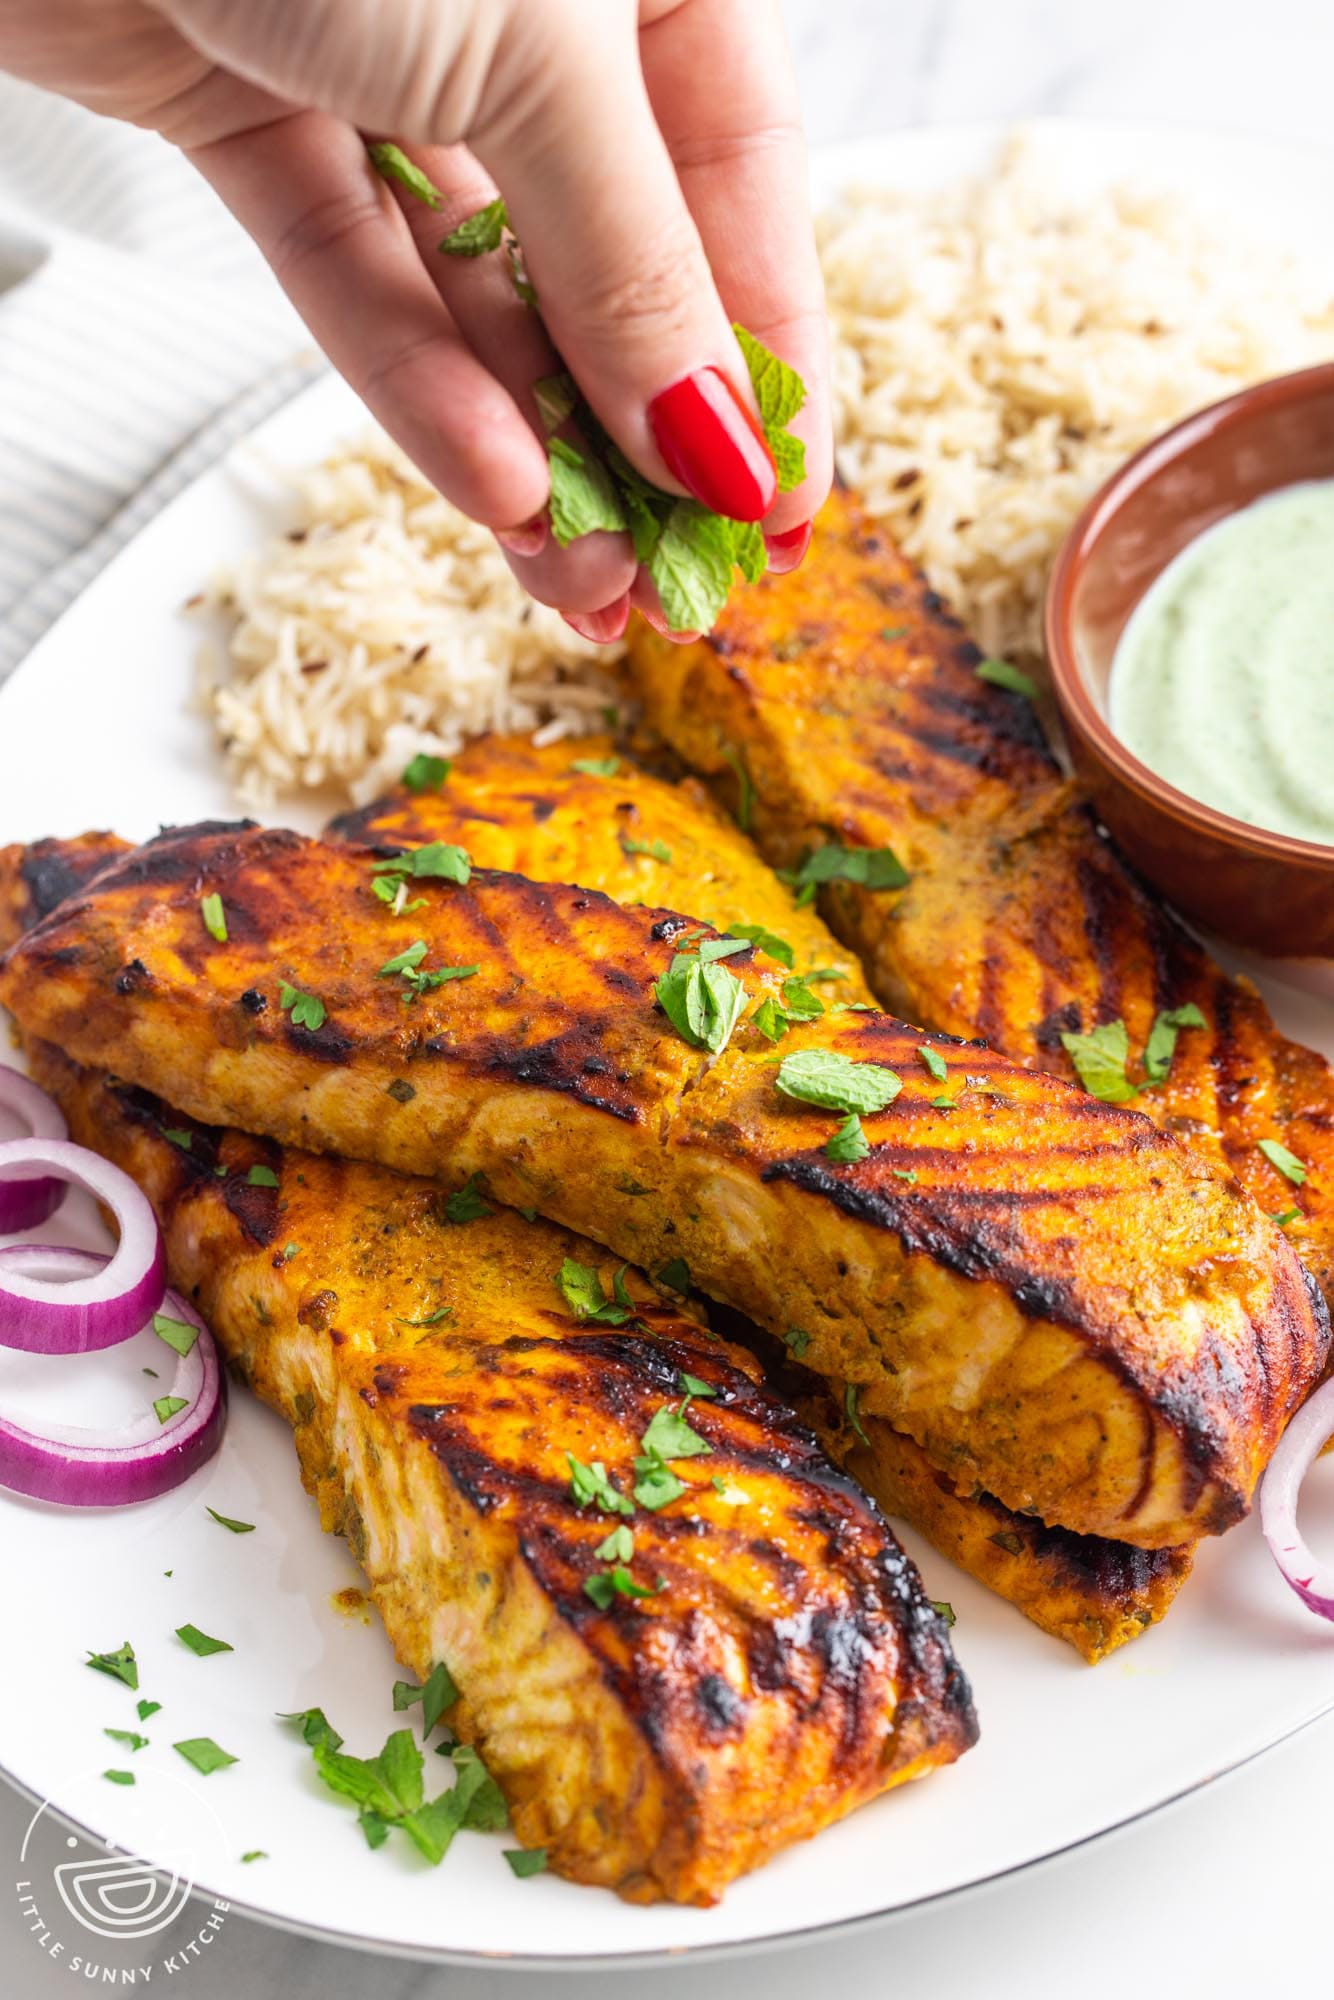 a platter holding tandoori salmon and rice, garnished with fresh cilantro and red onions